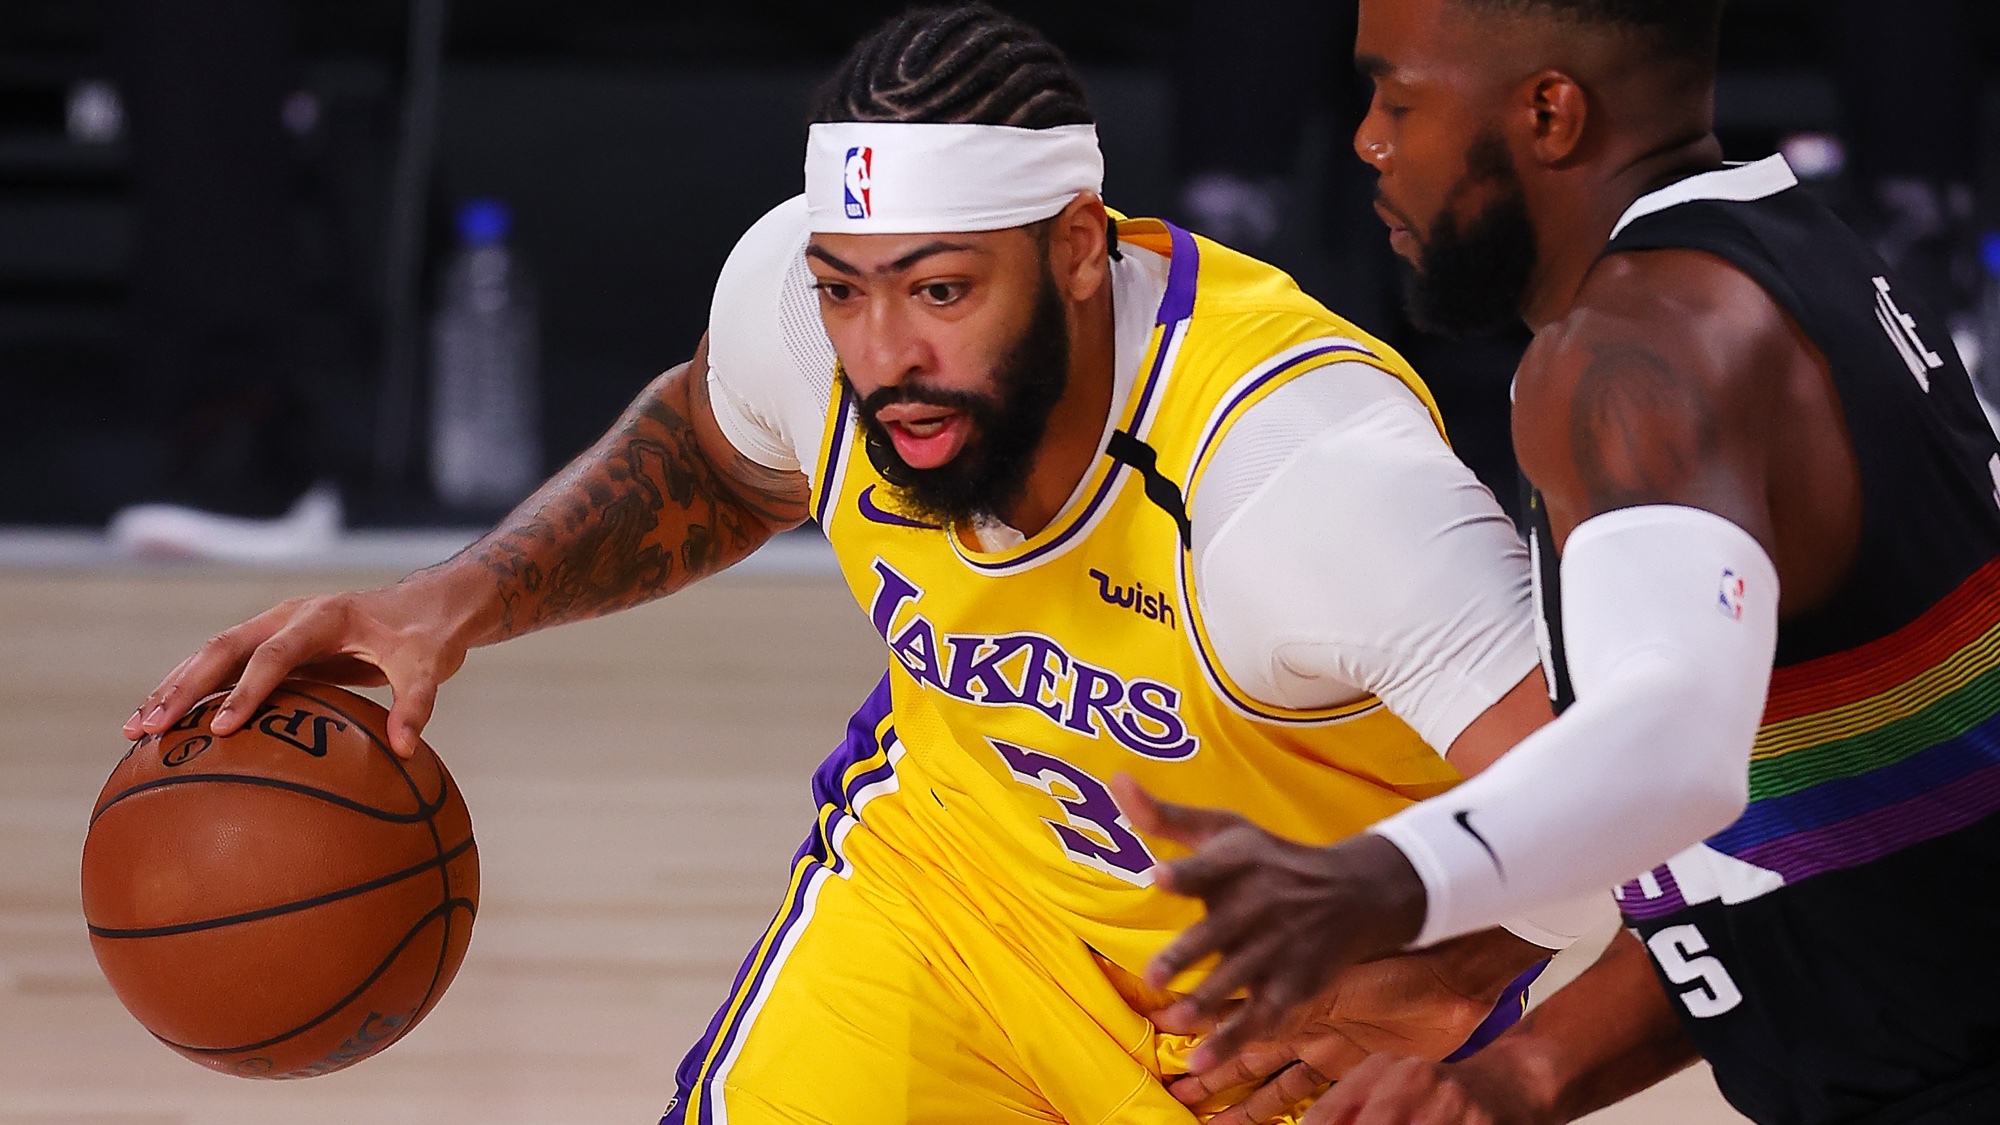 Lakers Vs Nuggets Live Stream How To Watch Game 5 Of The Nba Playoffs Online Tom S Guide